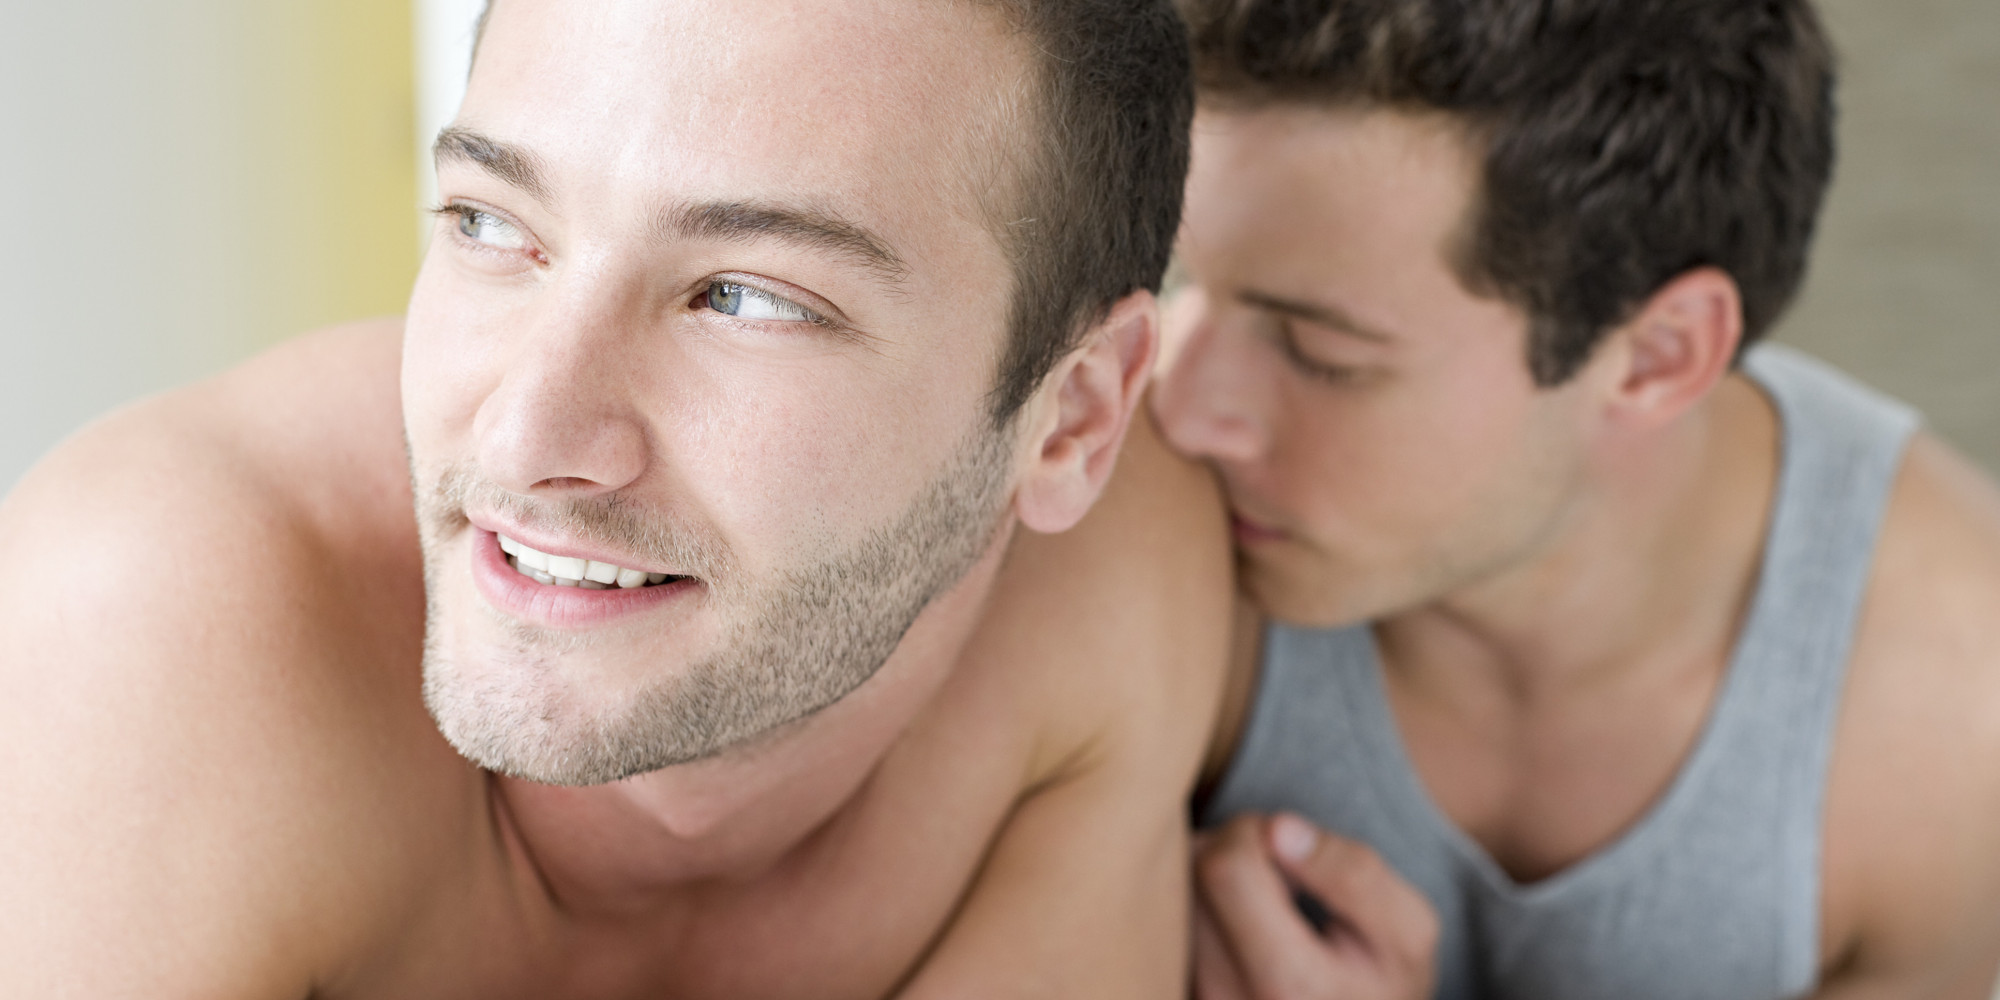 Sexual Wellbeing Challenges for the Modern Gay Man